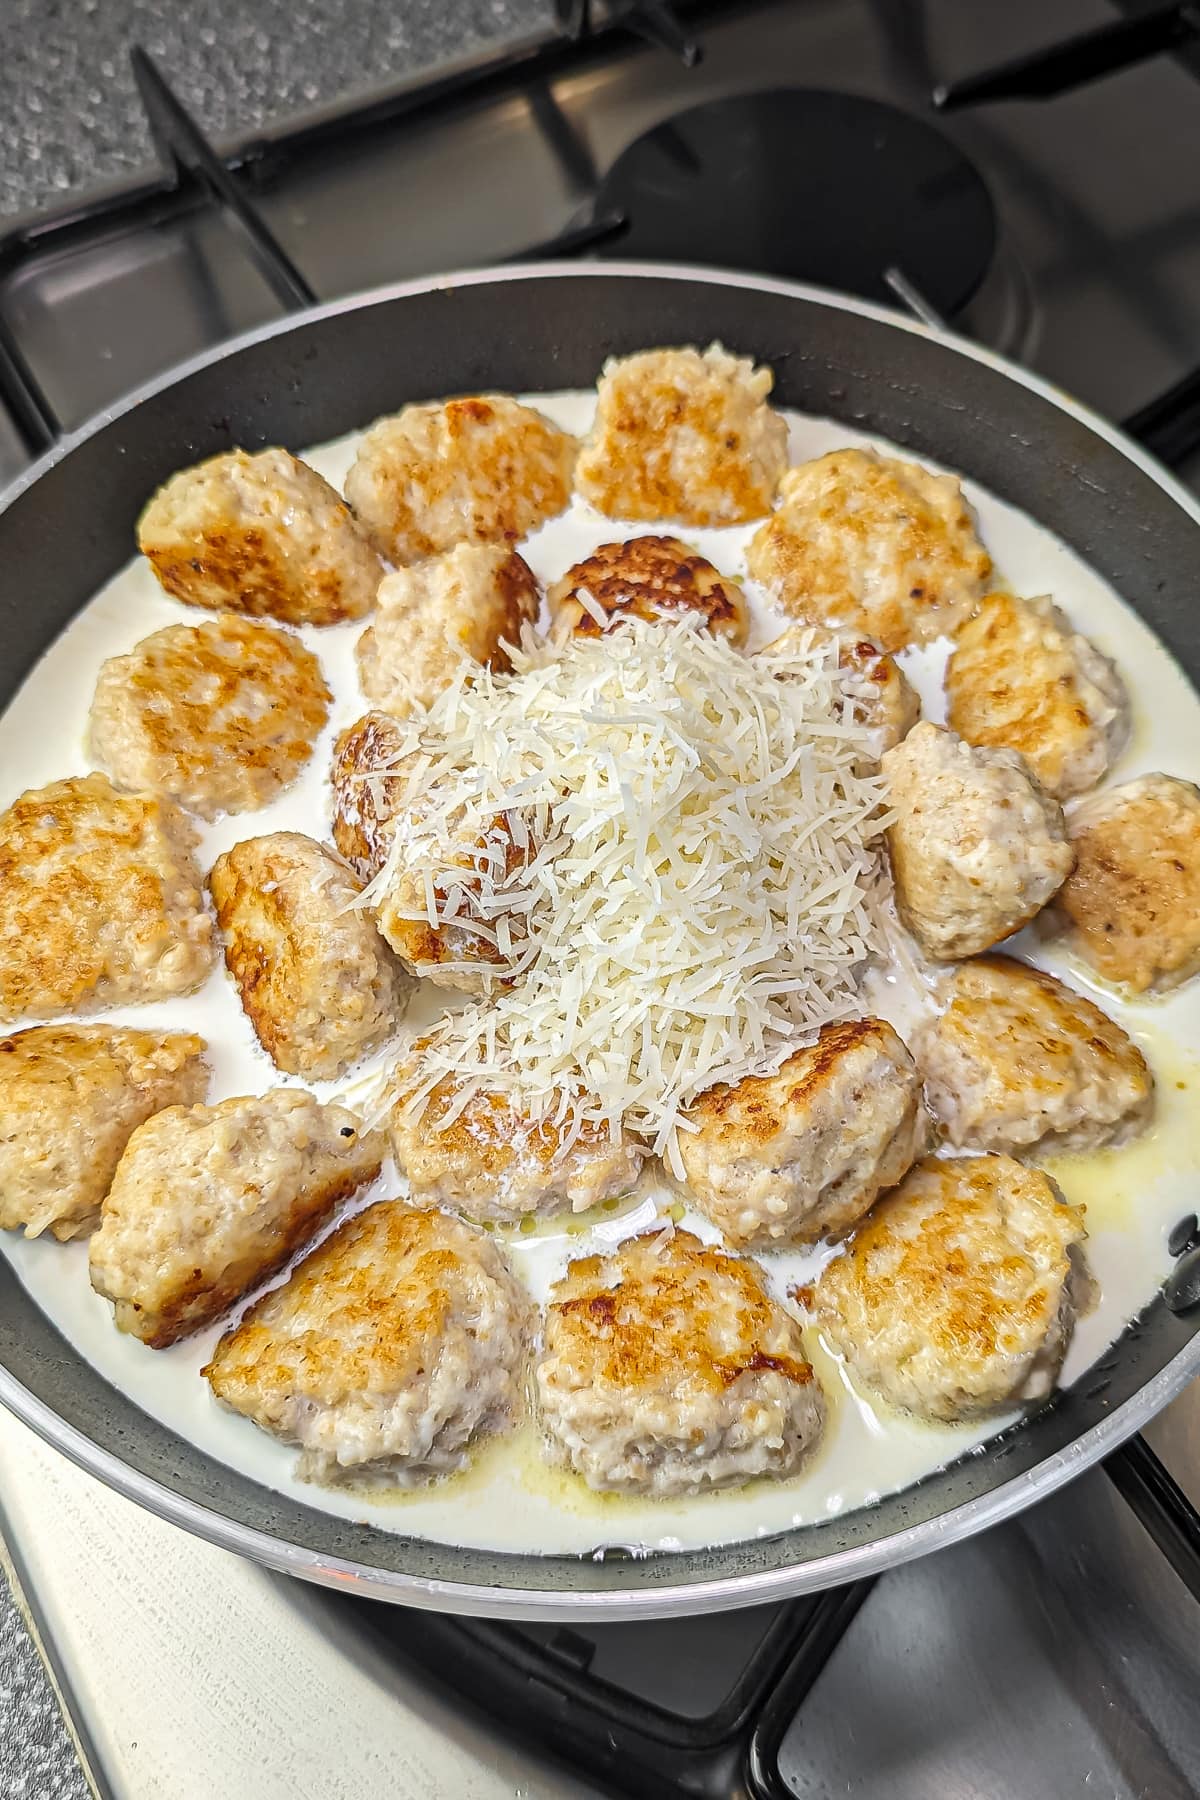 Meatballs in a creamy sauce topped with grated cheese, cooking in a frying pan.